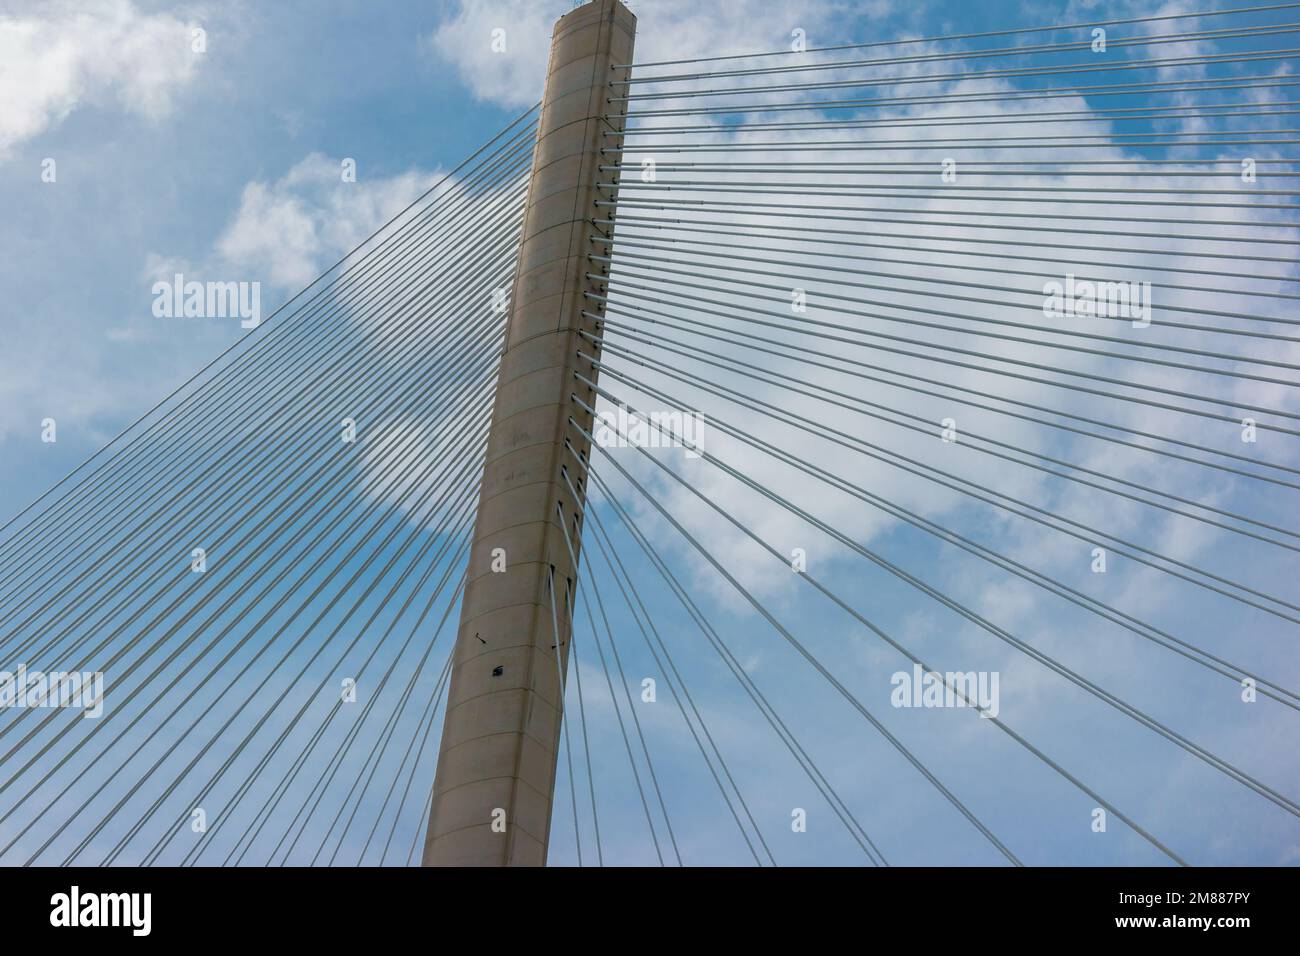 Single tower and cables of the Queensferry Crossing over the Firth of Forth, Scotland Stock Photo